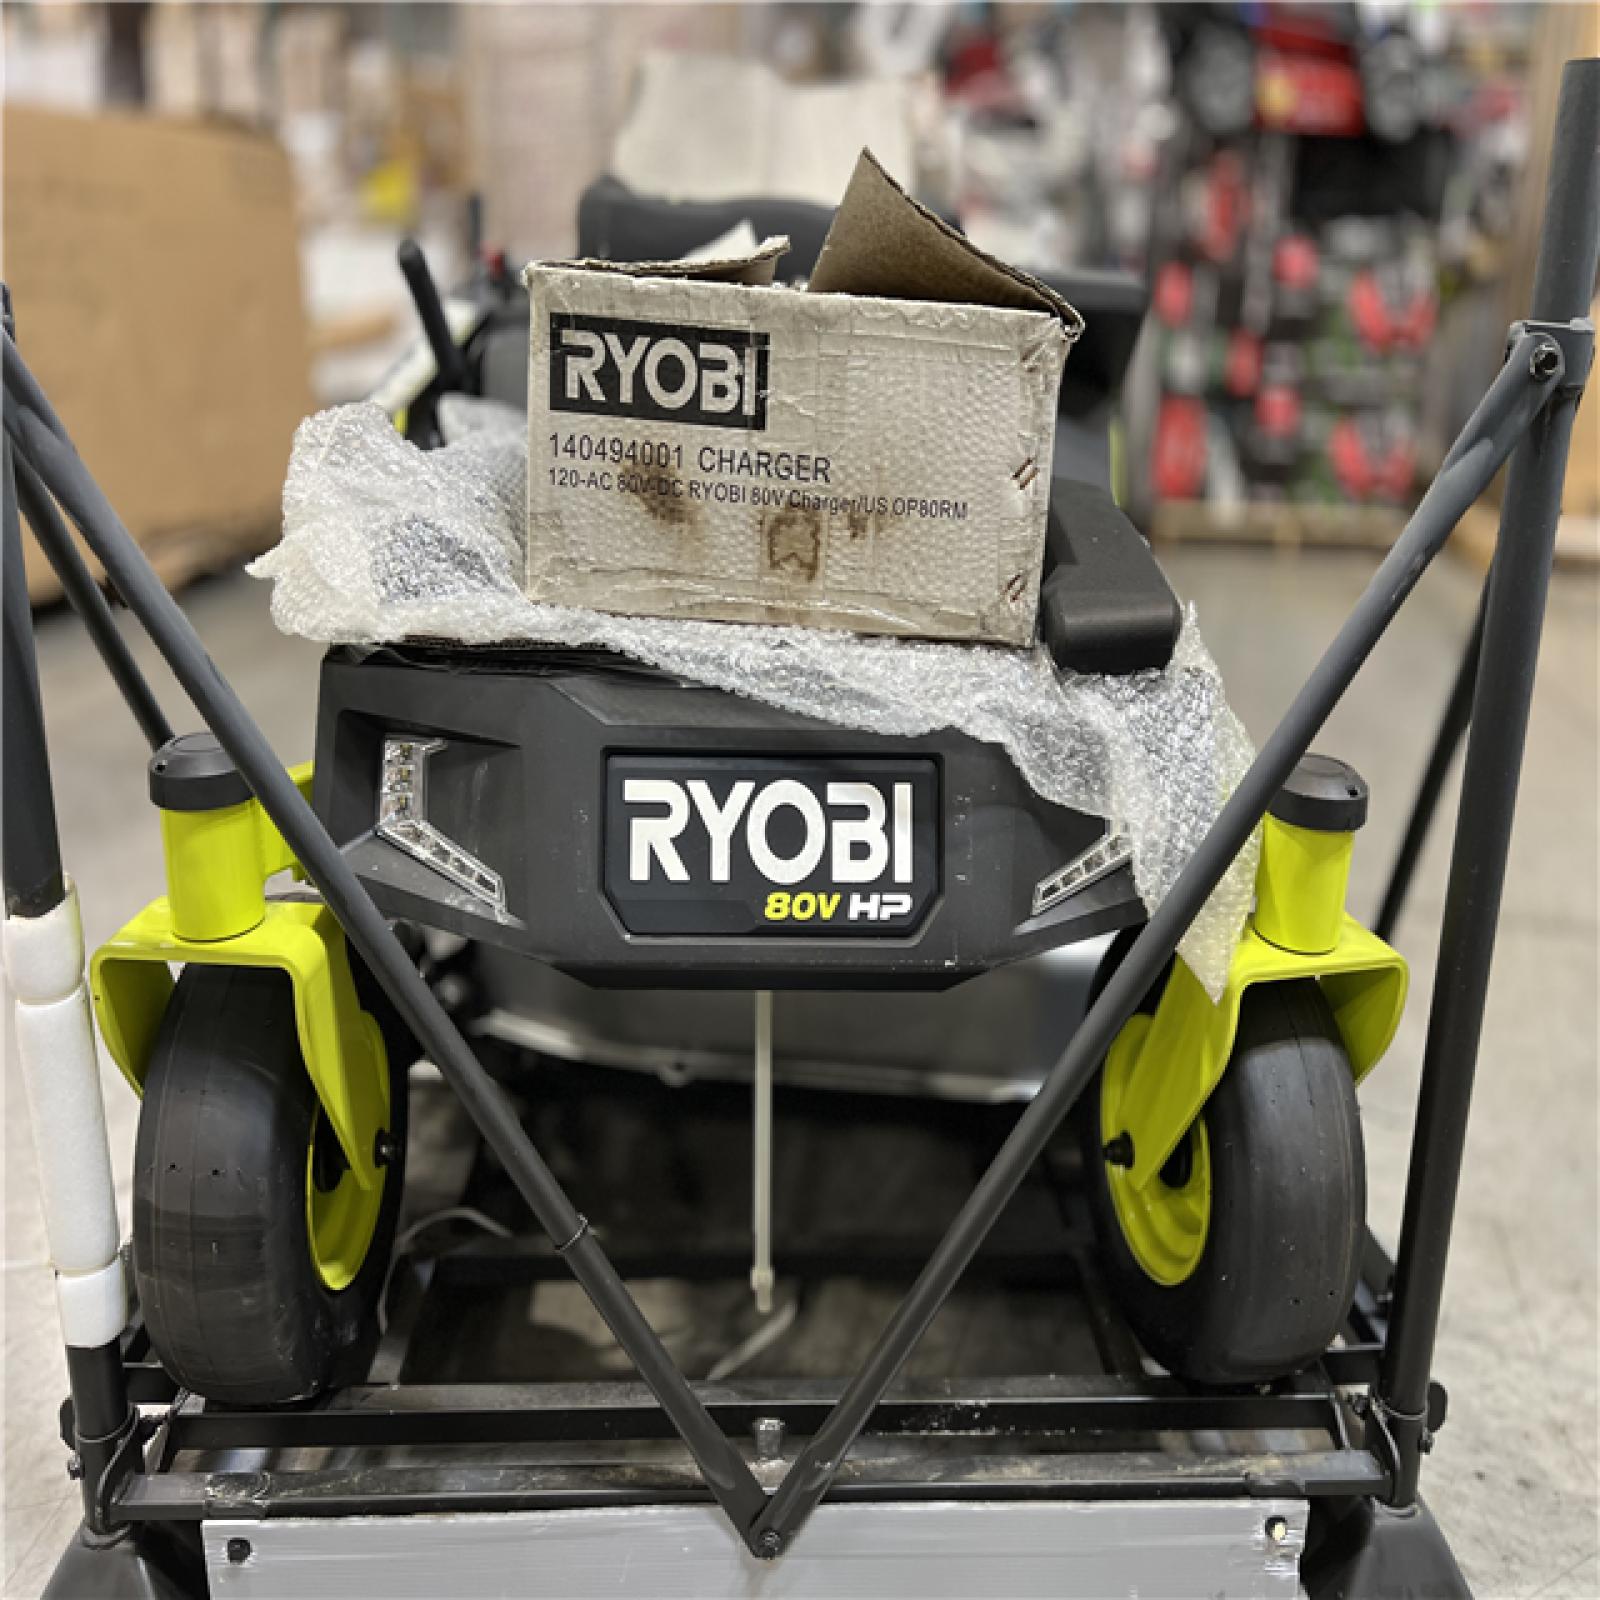 DALLAS LOCATION- AS-IS - RYOBI 80V HP Brushless 42 in. Battery Electric Cordless Zero Turn Riding Mower